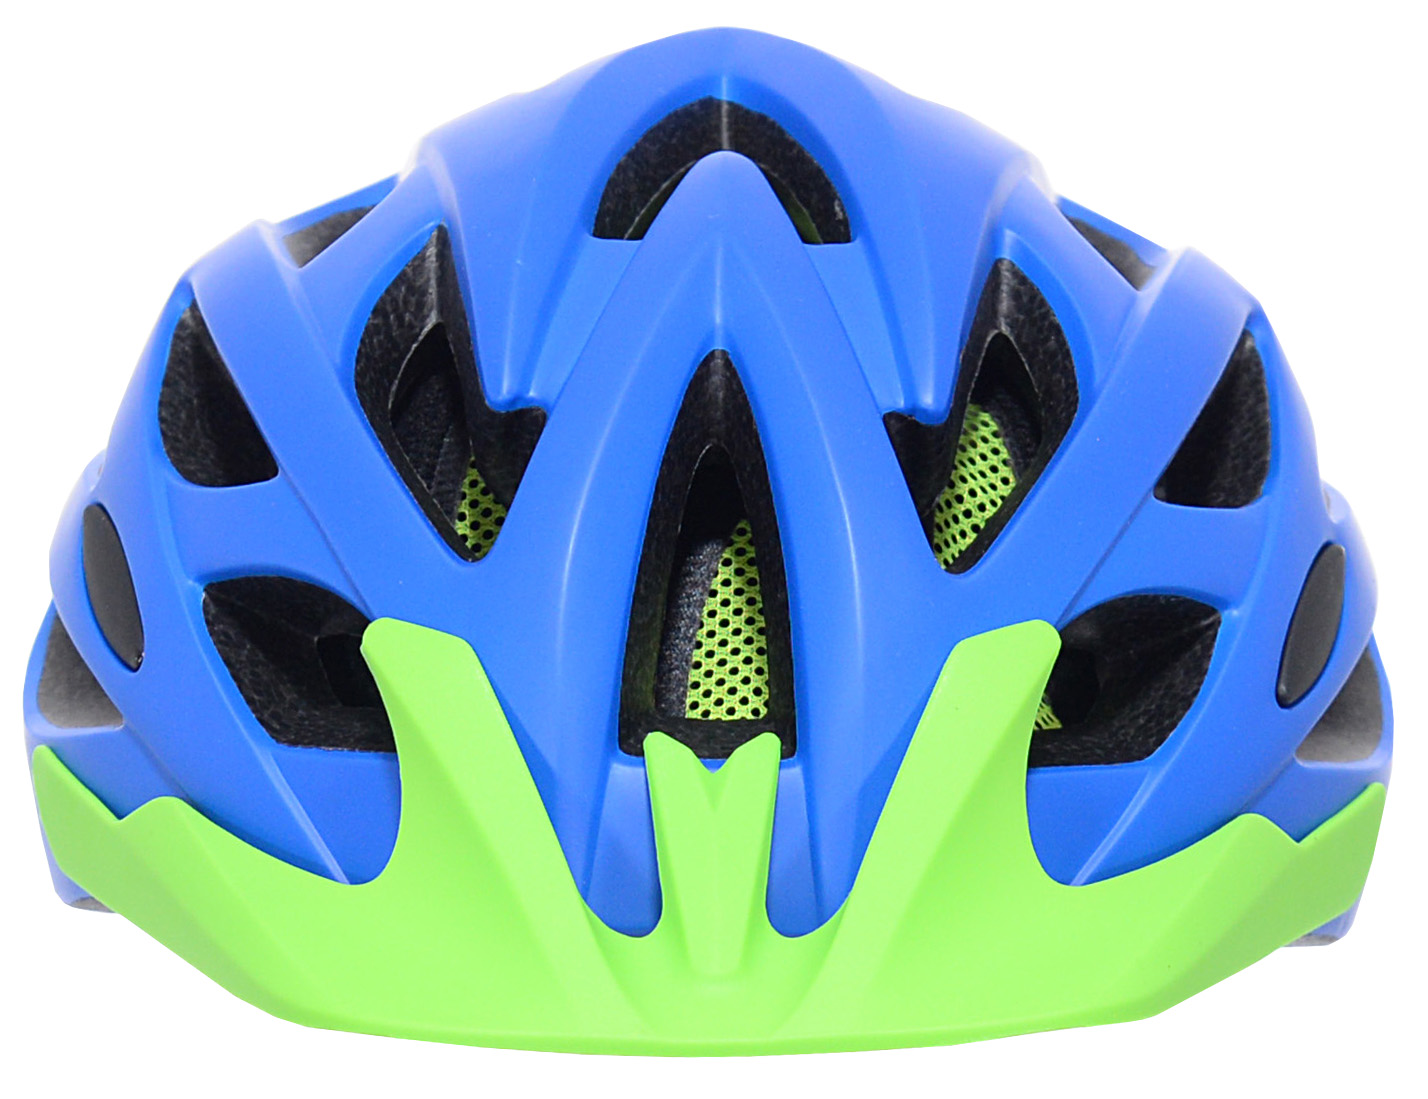 Kent Adult Helmet, Blue and Green with Mesh Liner - image 4 of 6